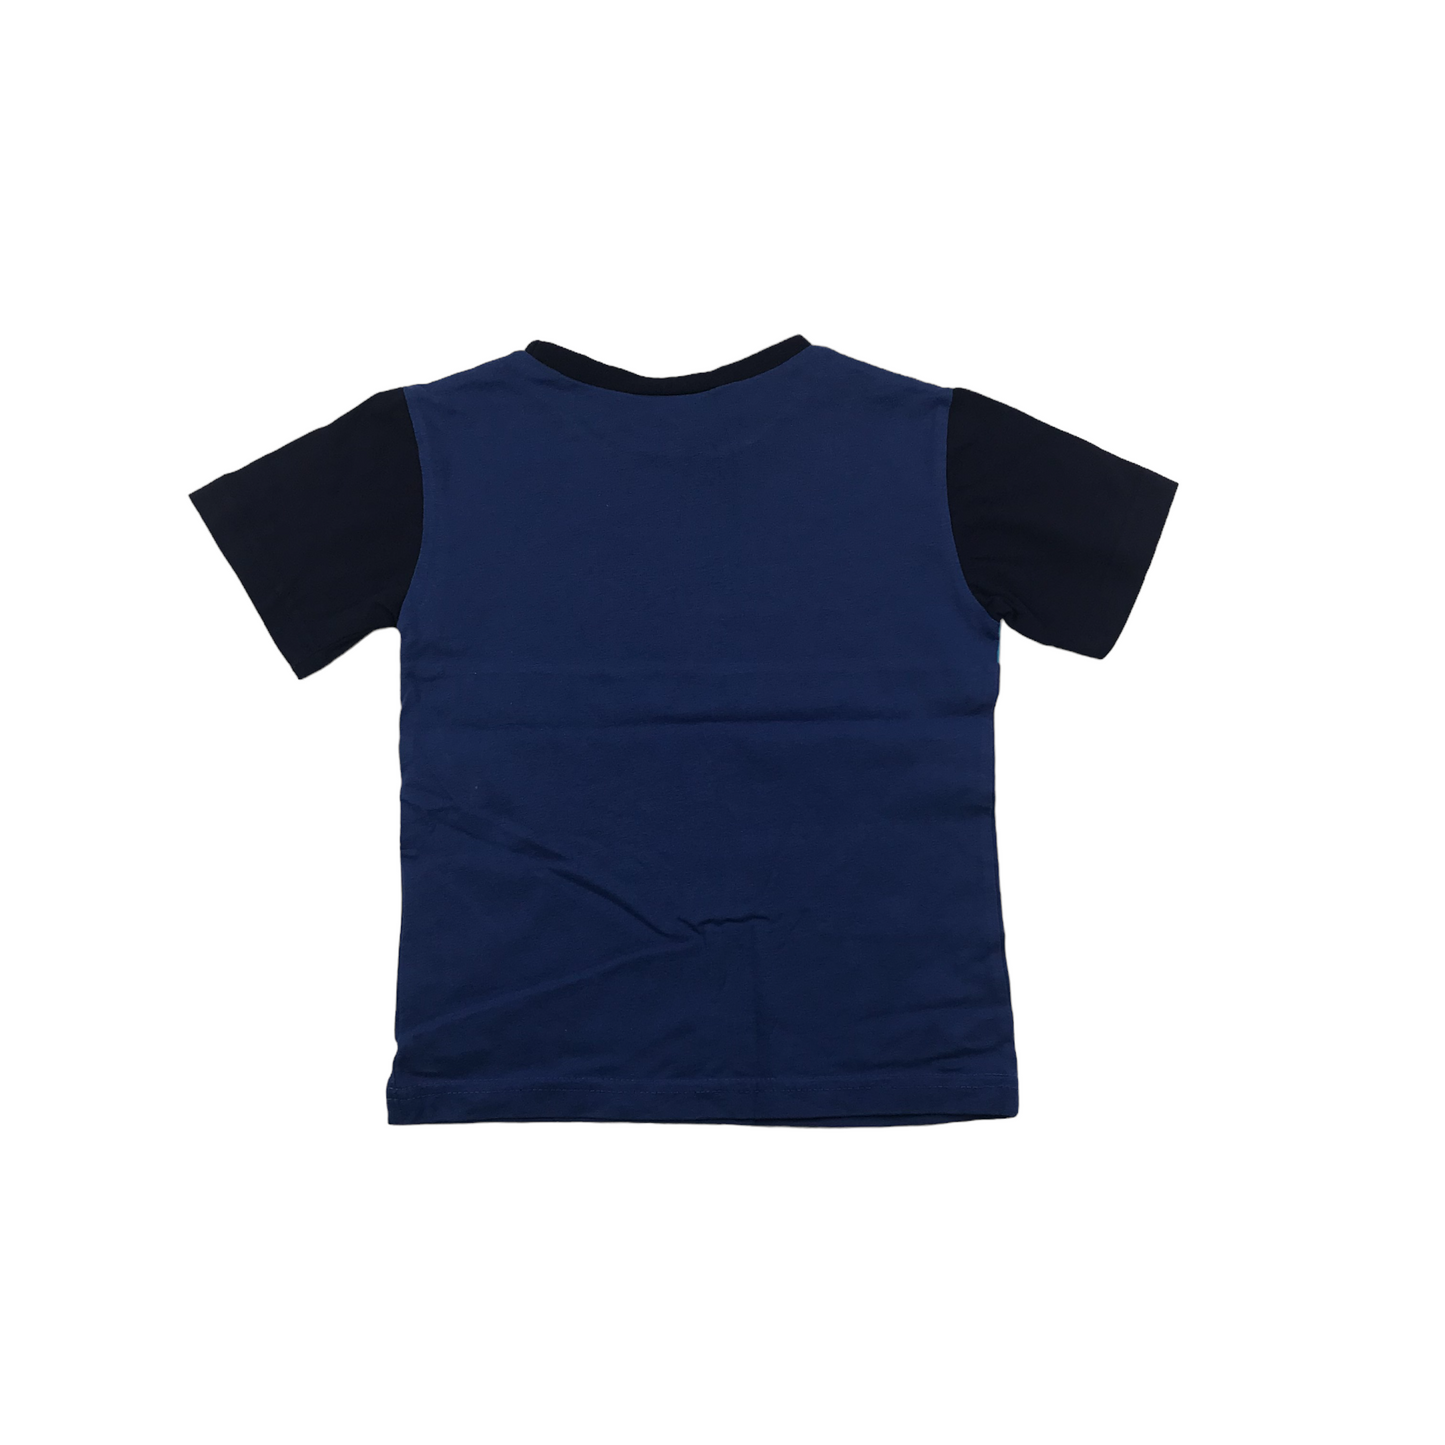 Bench. Blue and Navy T-shirt and Shorts Set Age 4